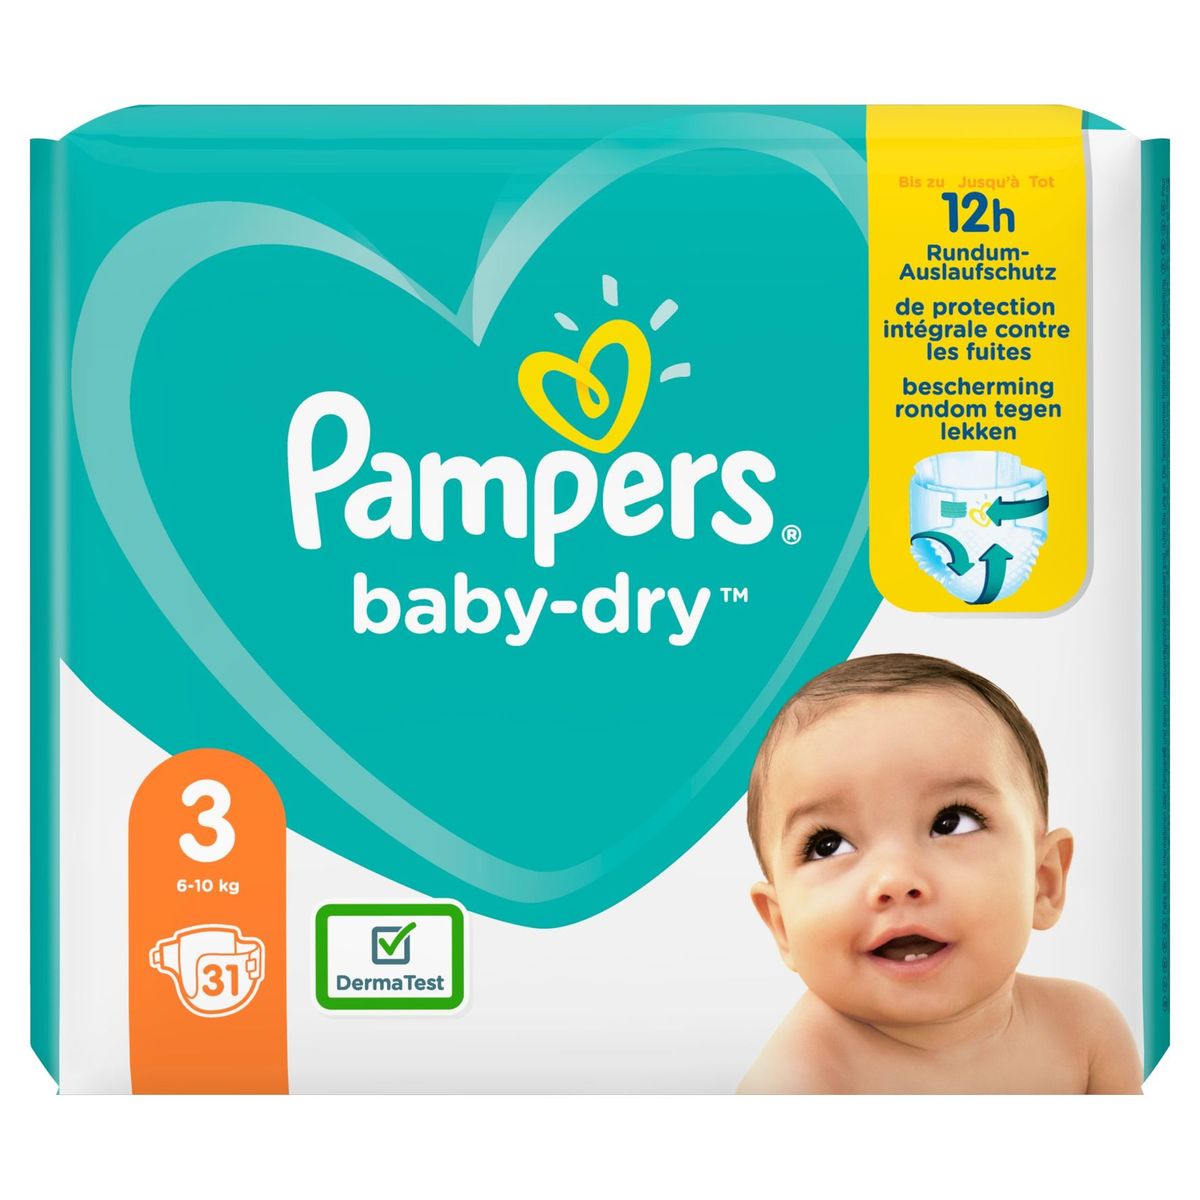 Pampers Baby-Dry Taille 3, 31 Langes, 6-10kg